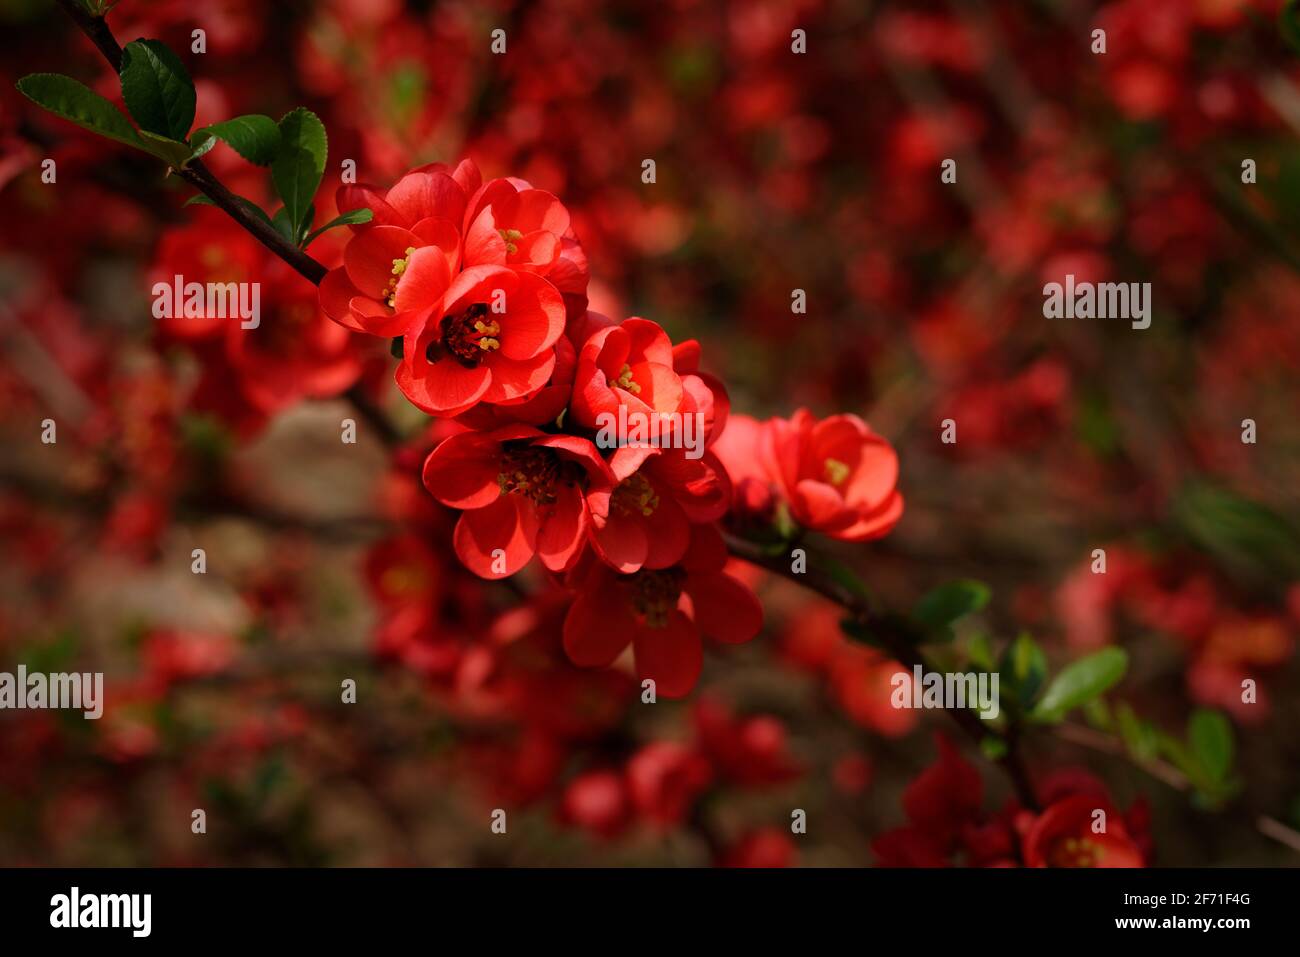 Chaenomeles japonica,  red flowers of Japanese quince or Maule's quince Stock Photo